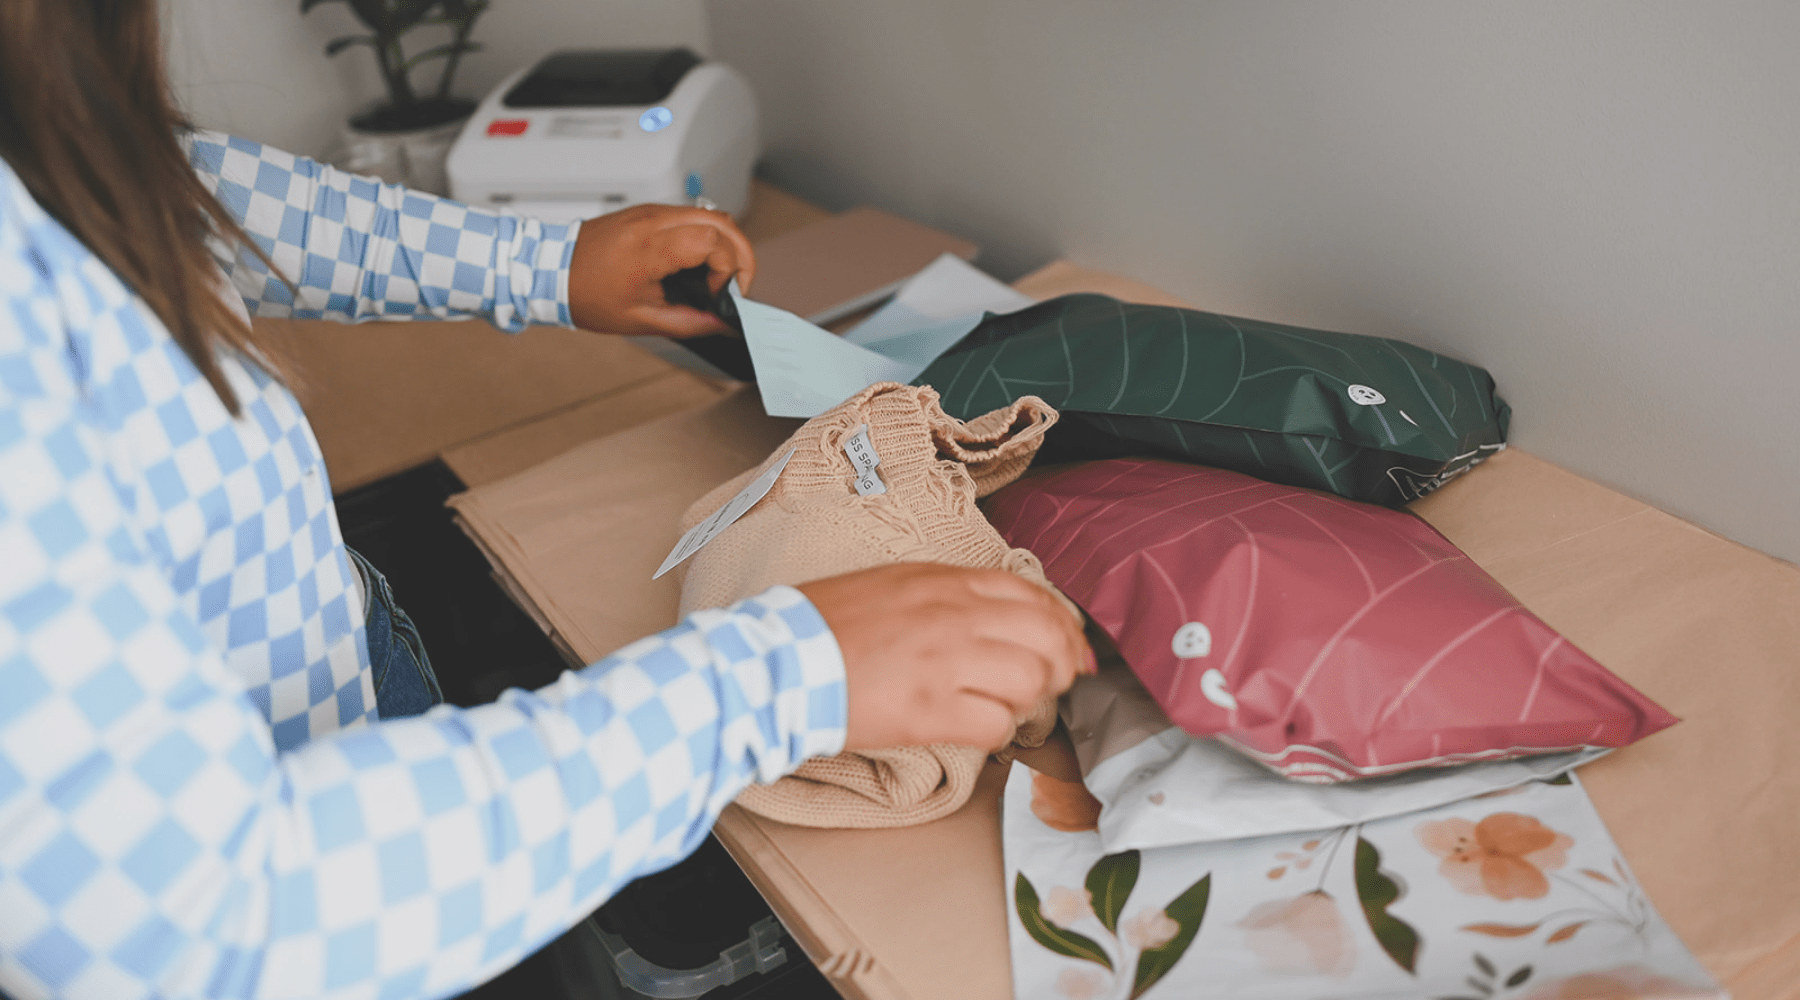 packing with biodegradable mailer bags